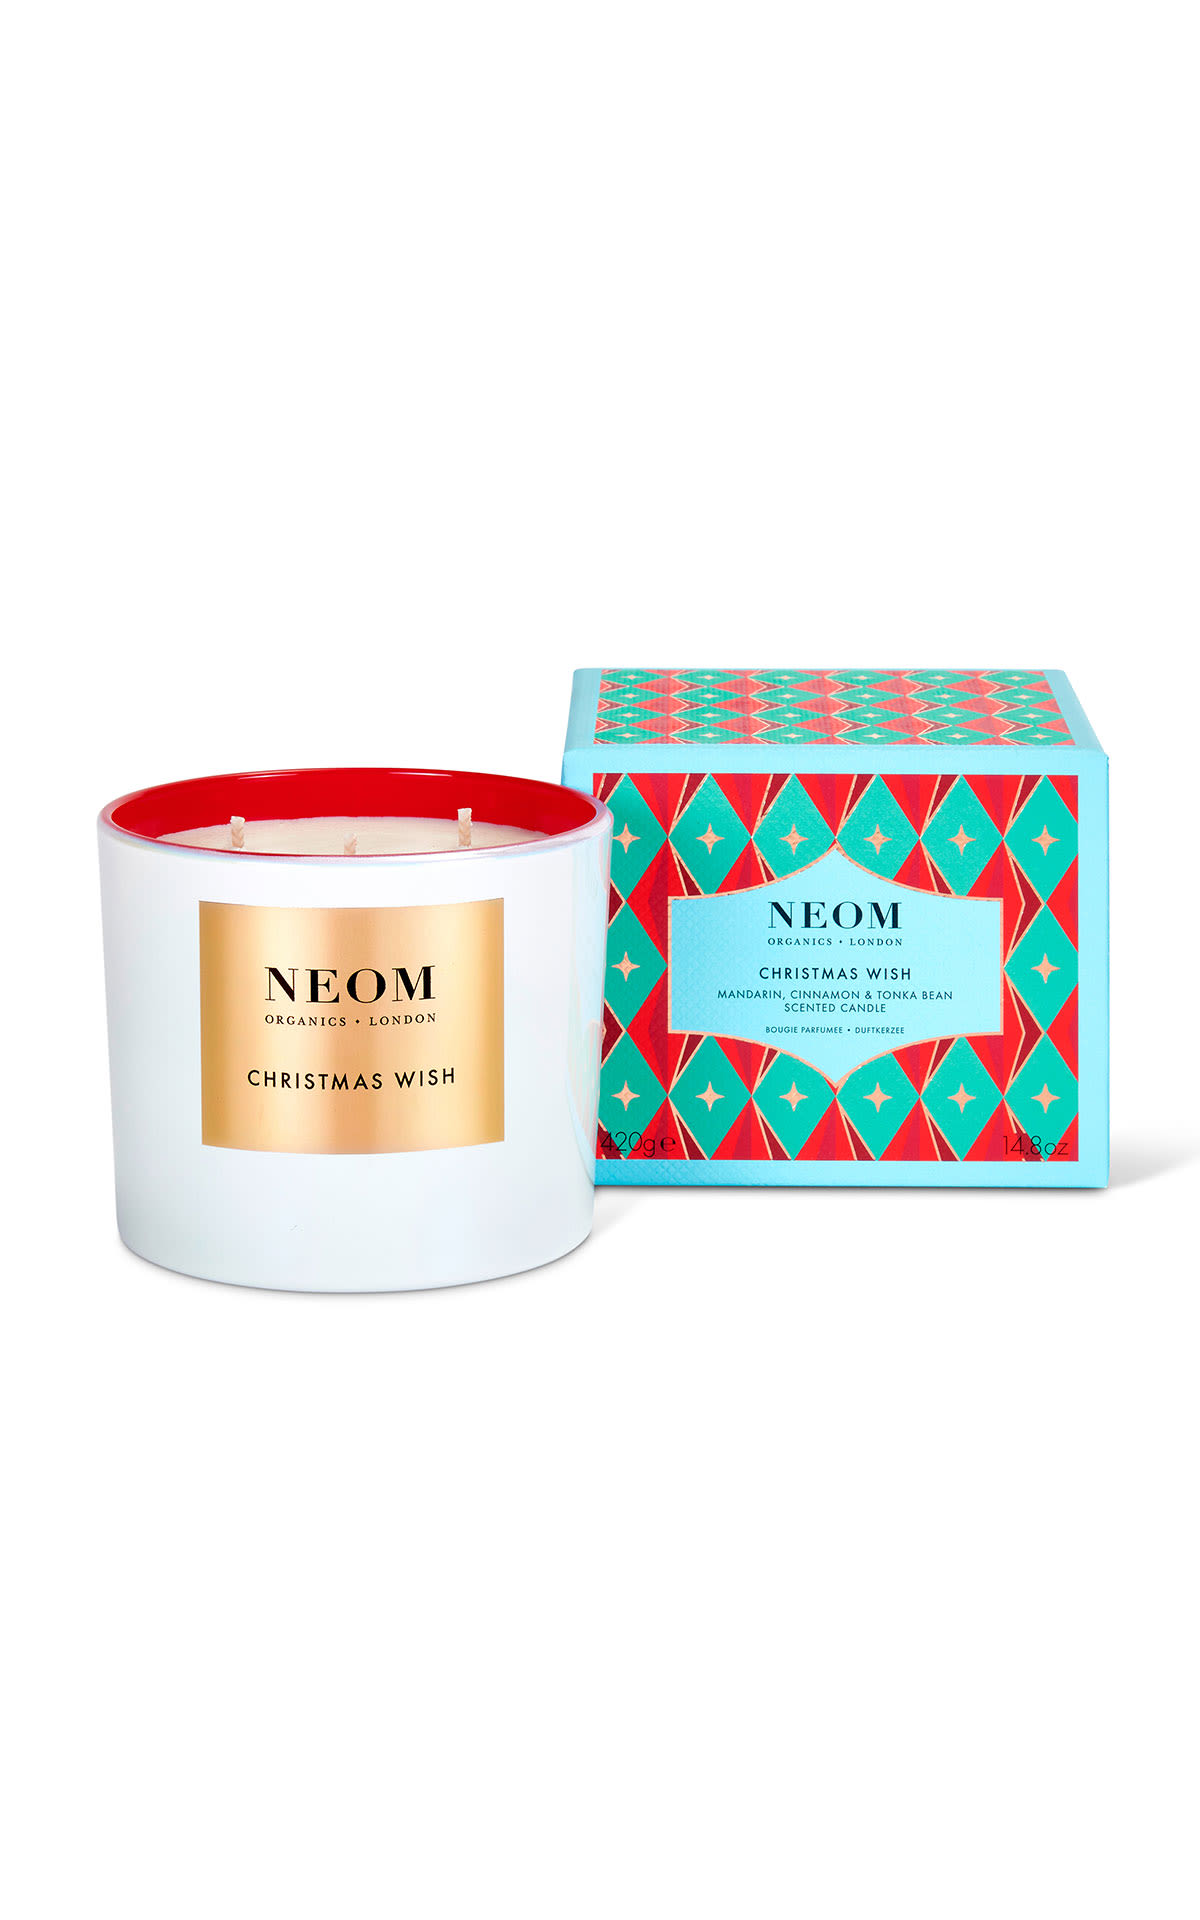 NEOM Christmas wish three wick from Bicester Village